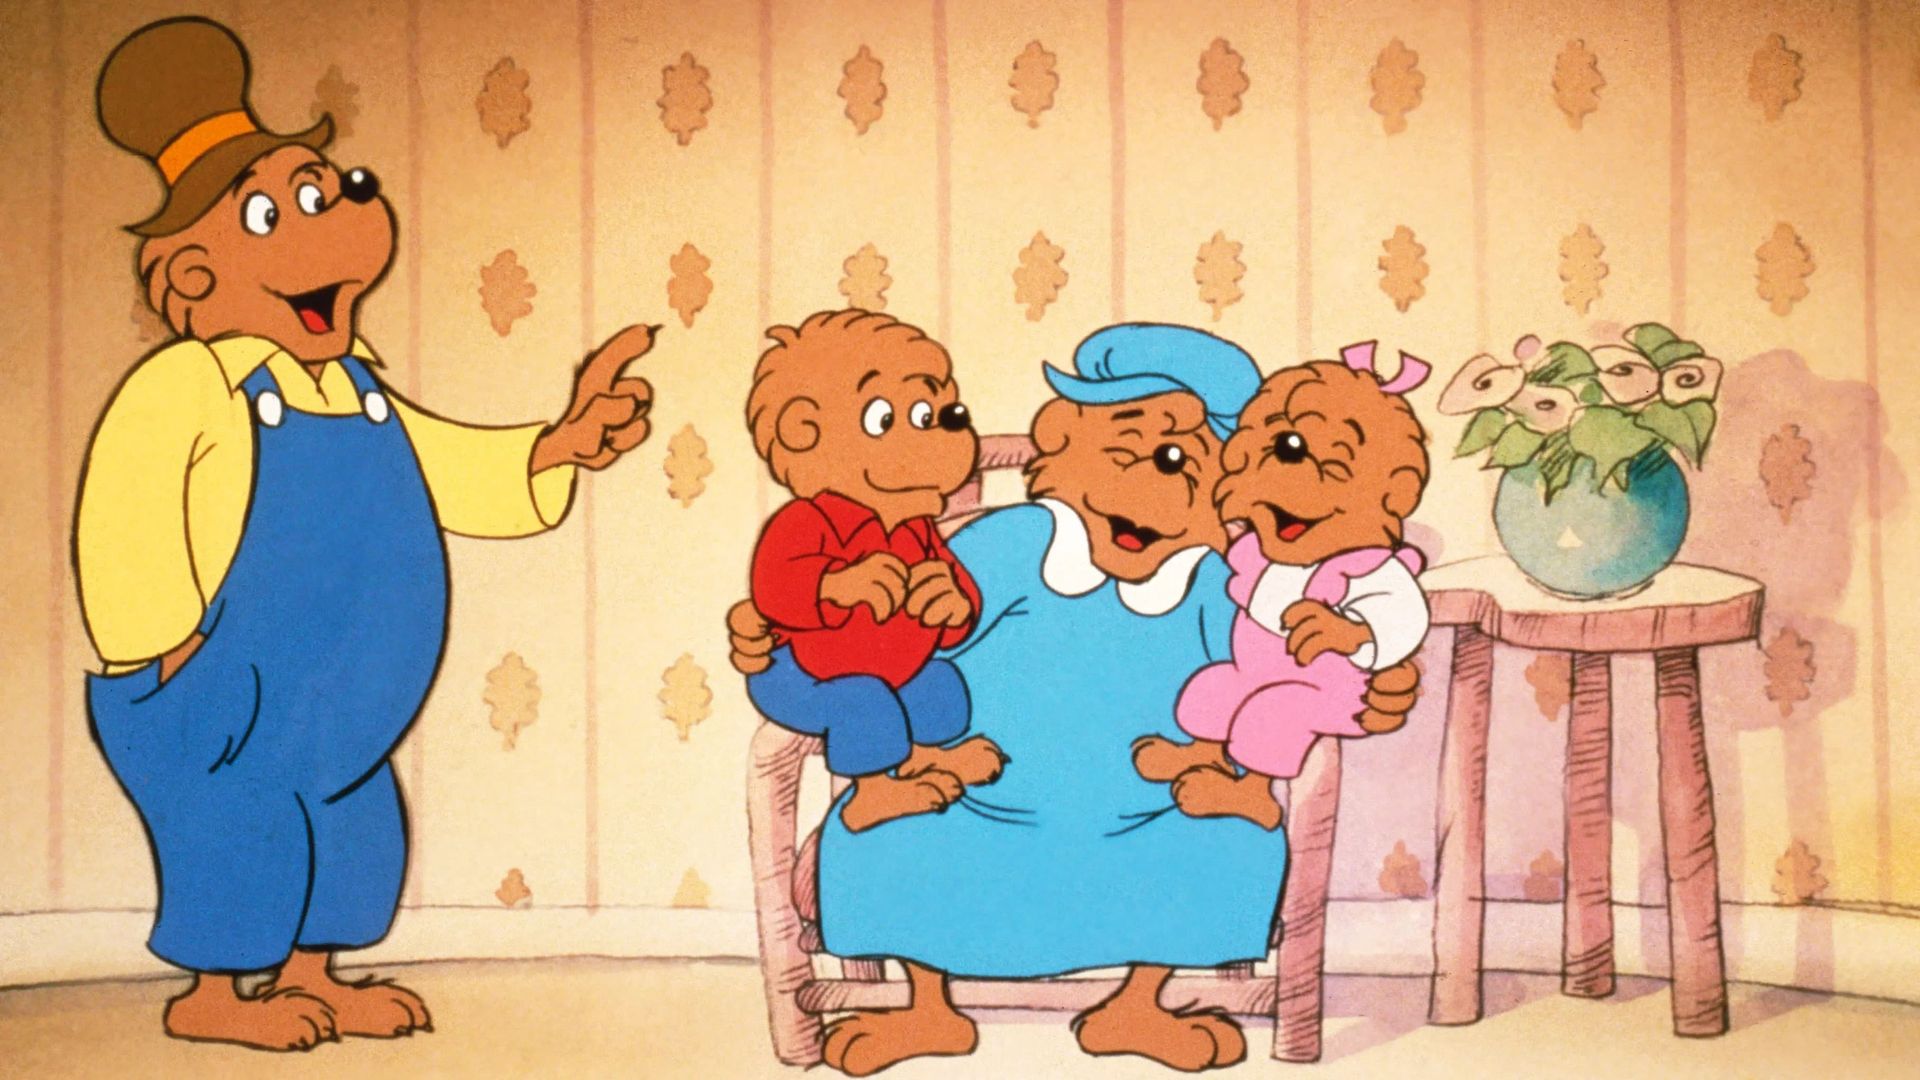 The Berenstain Bears background